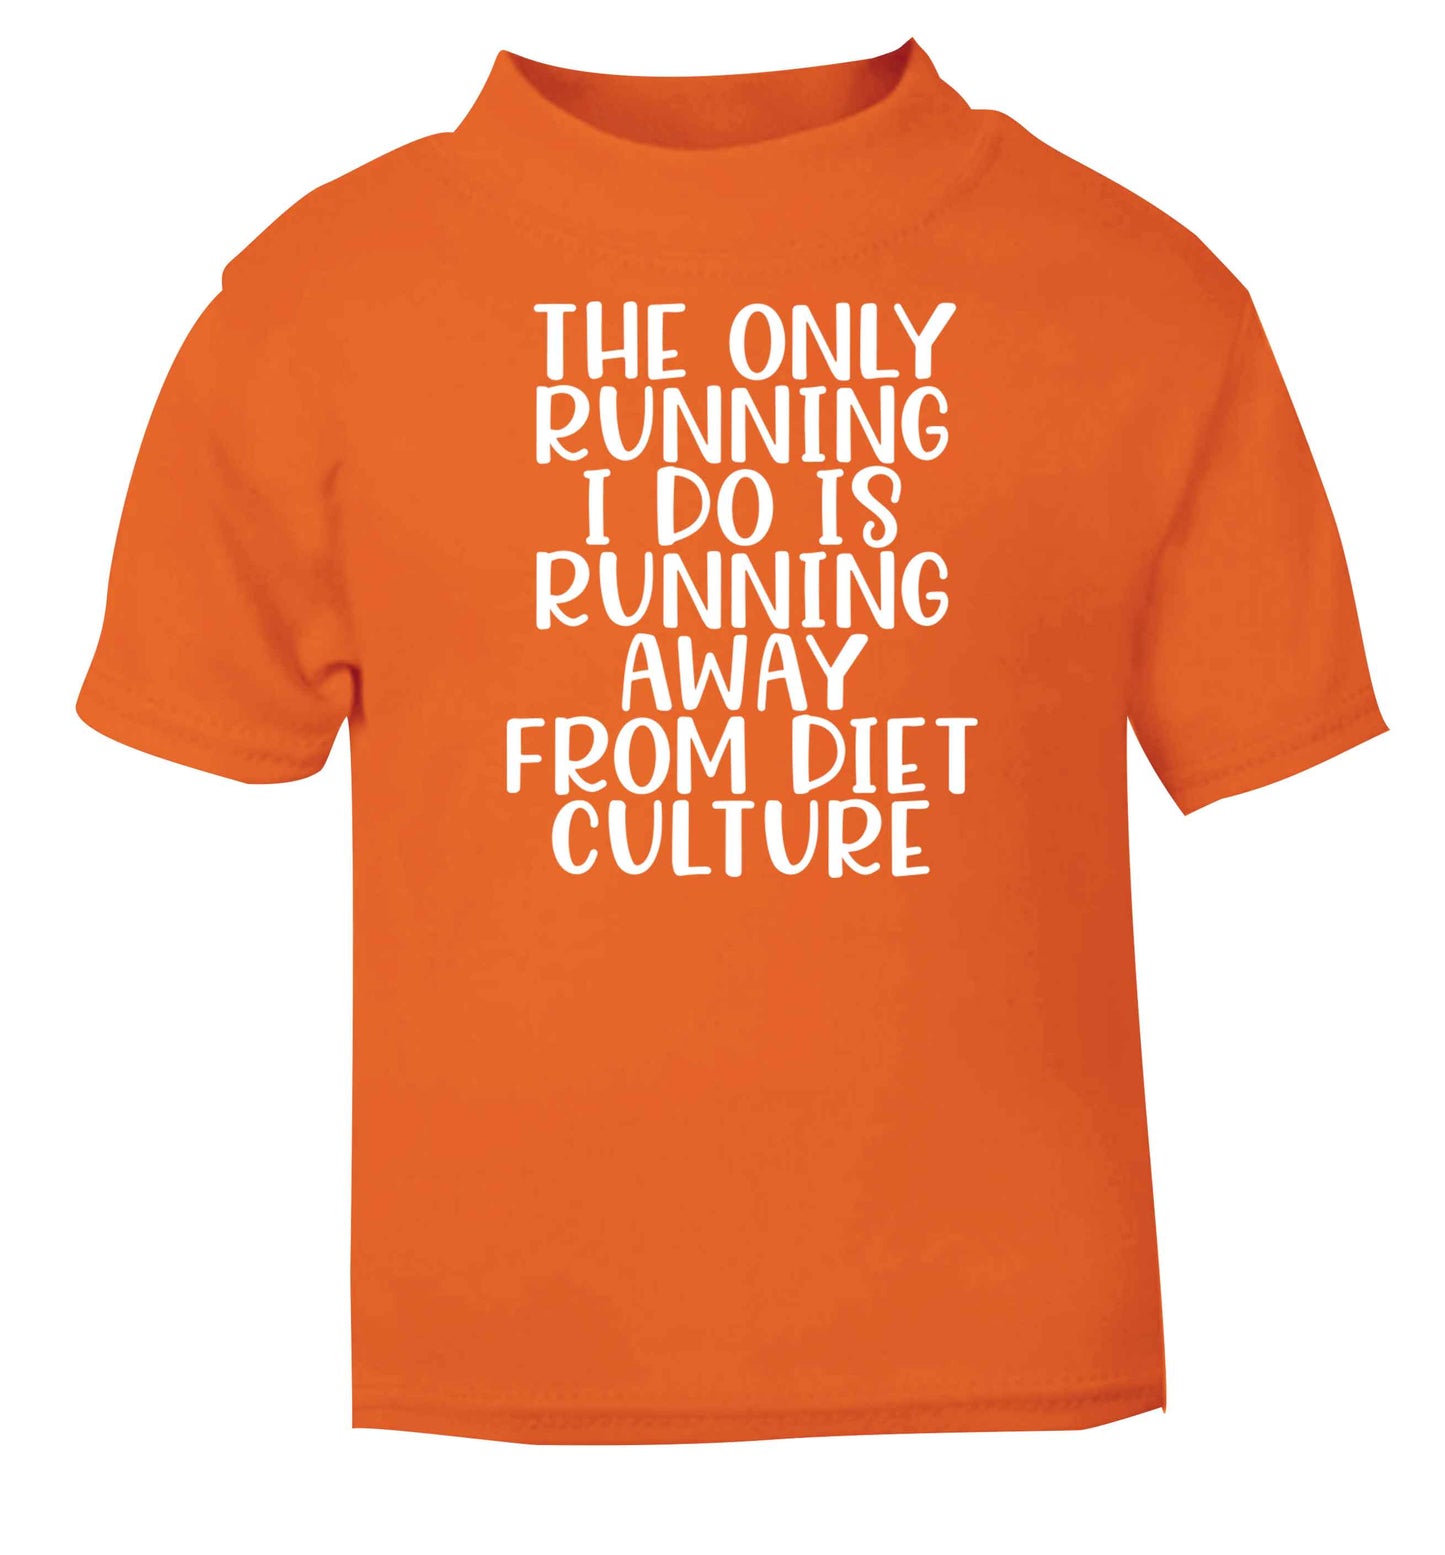 The only running I do is running away from diet culture orange baby toddler Tshirt 2 Years